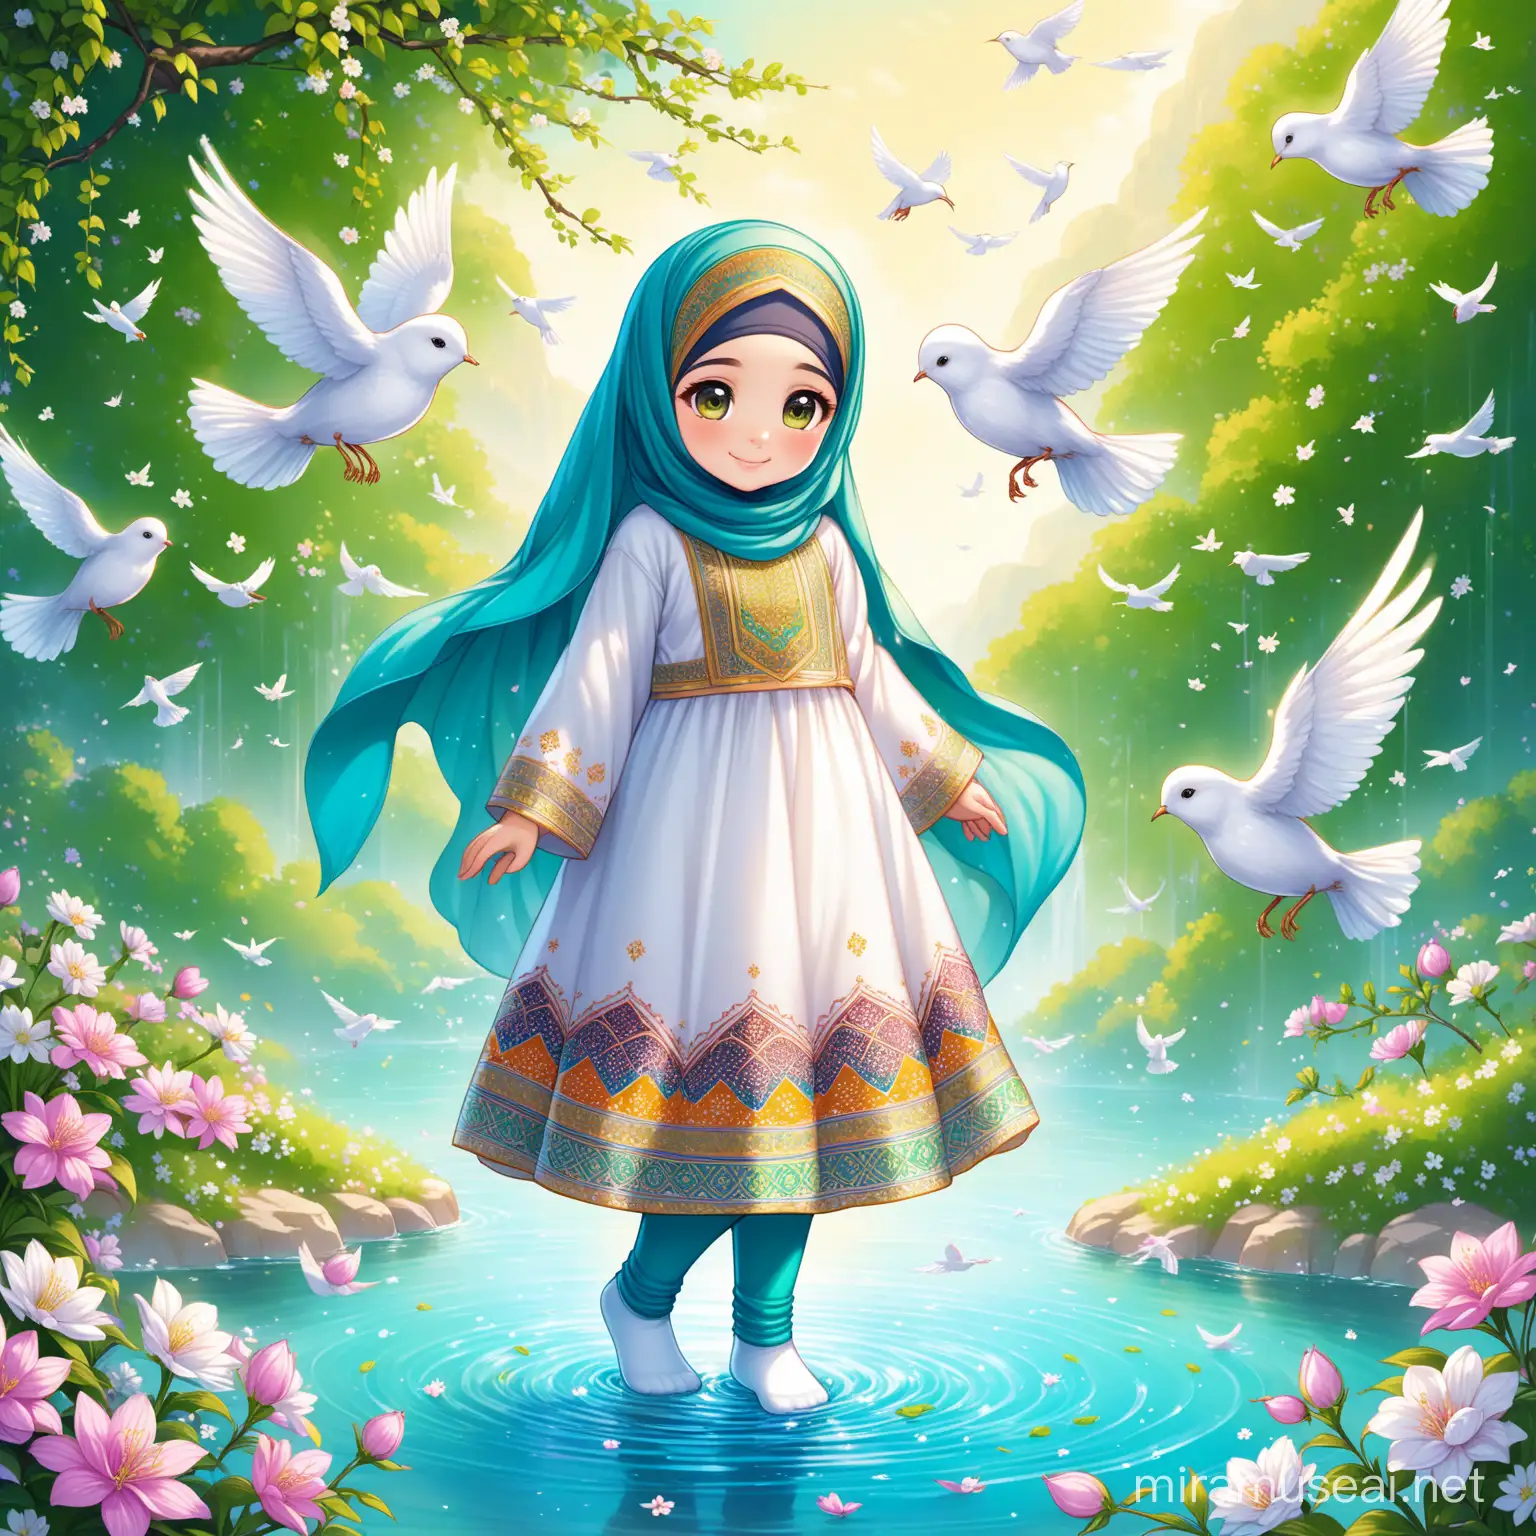 Character Persian little girl(full height, Muslim, with emphasis no hair out of veil(Hijab), eyes must be small, bigger nose, white skin, cute, smiling, wearing socks, clothes full of Persian designs, heavenly girl).

Atmosphere flowing water from the spring with flowers, nightingales and flying birds in spring.